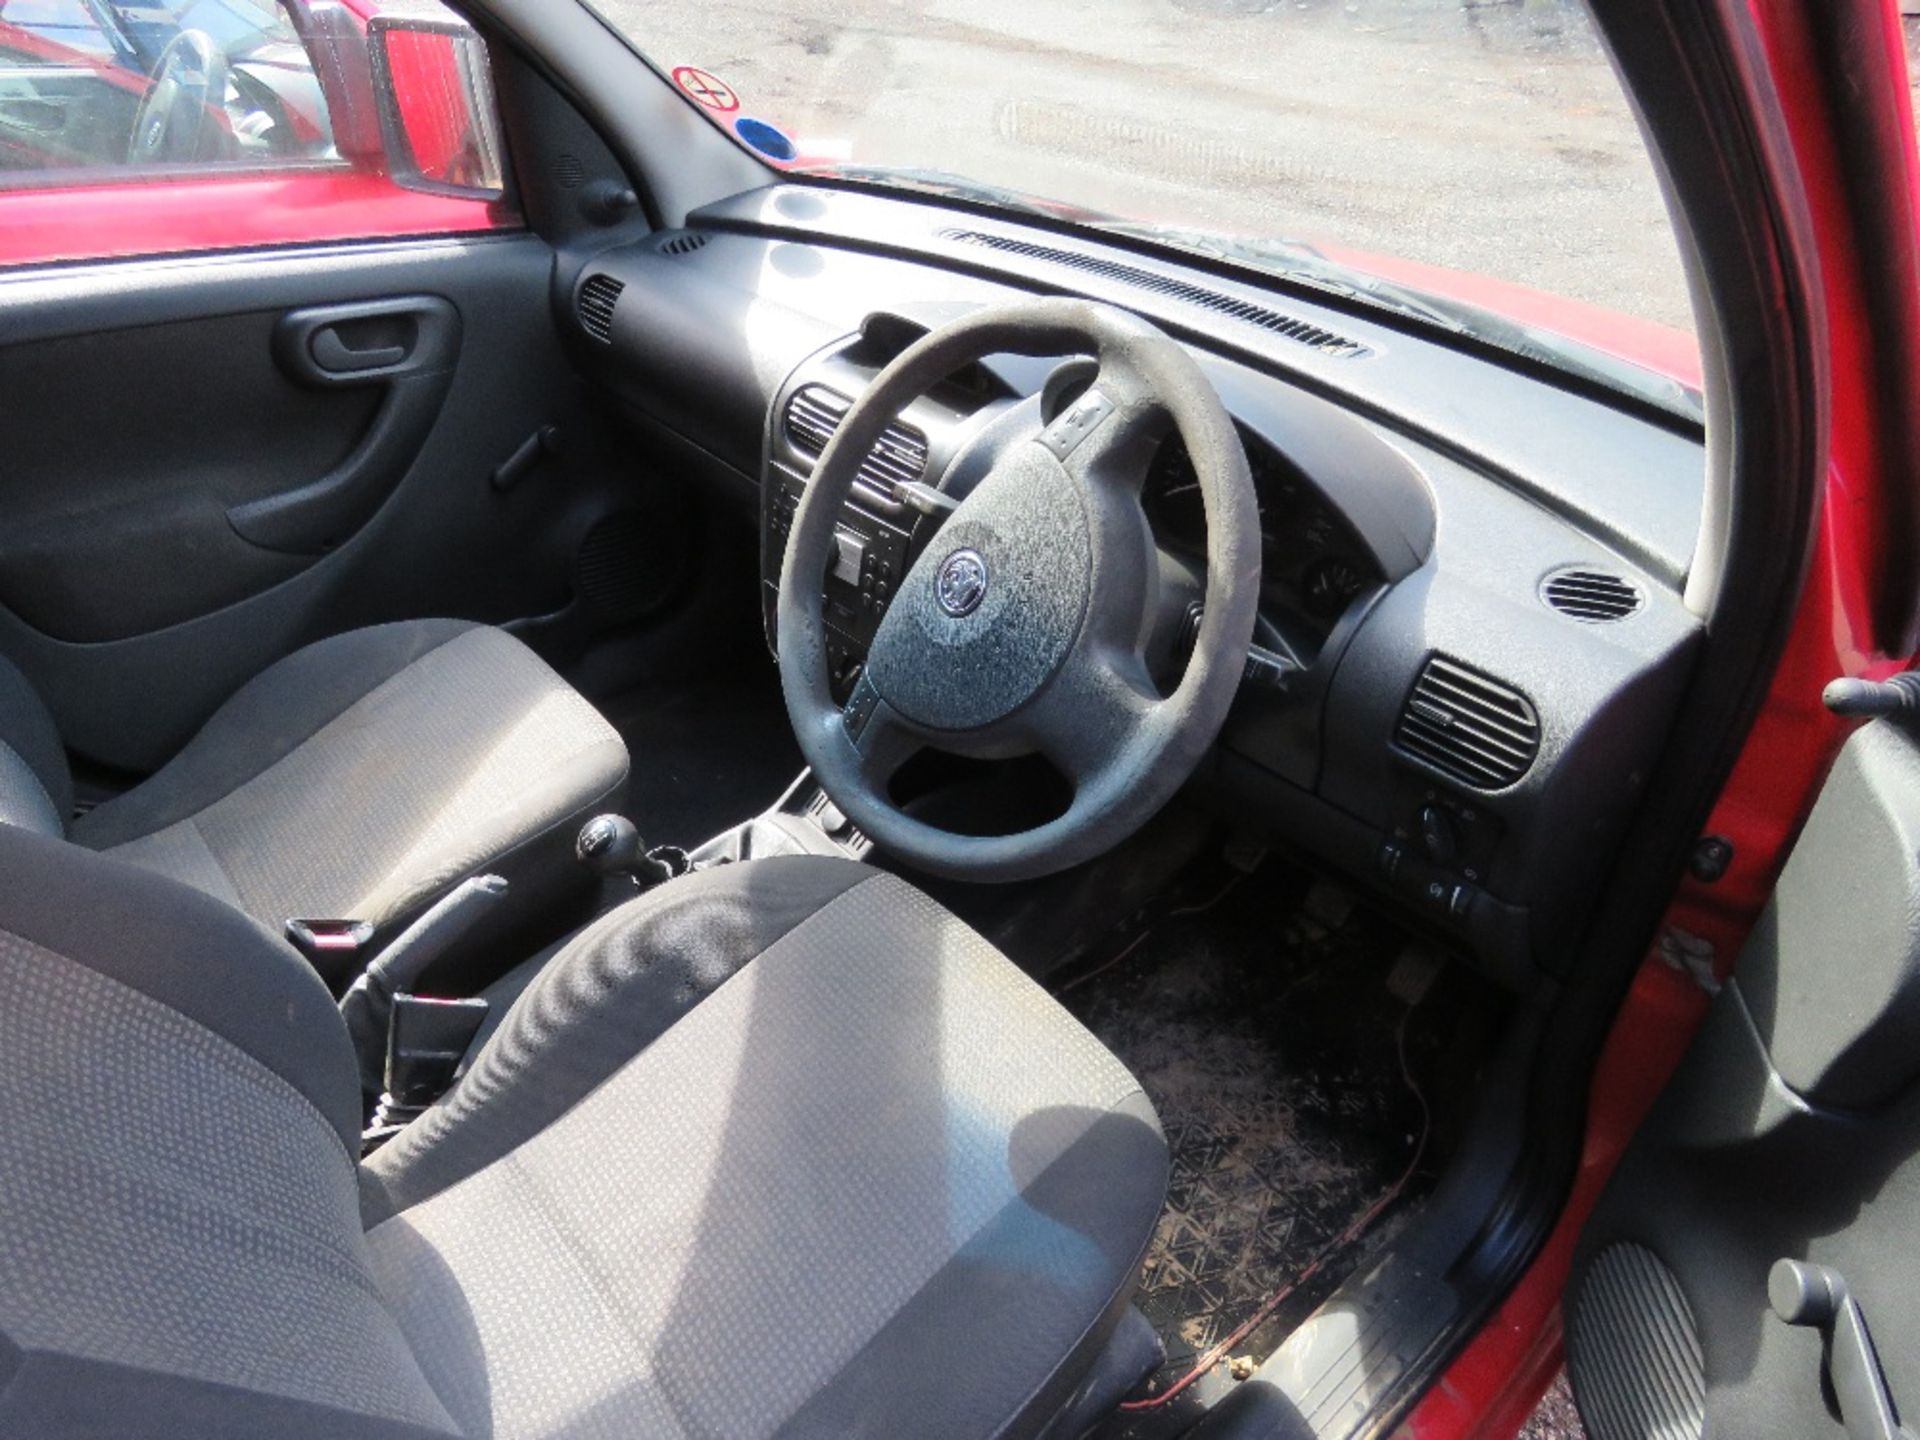 VAUXHALL COMBO PANEL VAN REG:NL58 BYB. MILES NOT SHOWING. TEST EXPIRED. SIDE DOOR. WHEN TESTED WAS S - Image 6 of 9